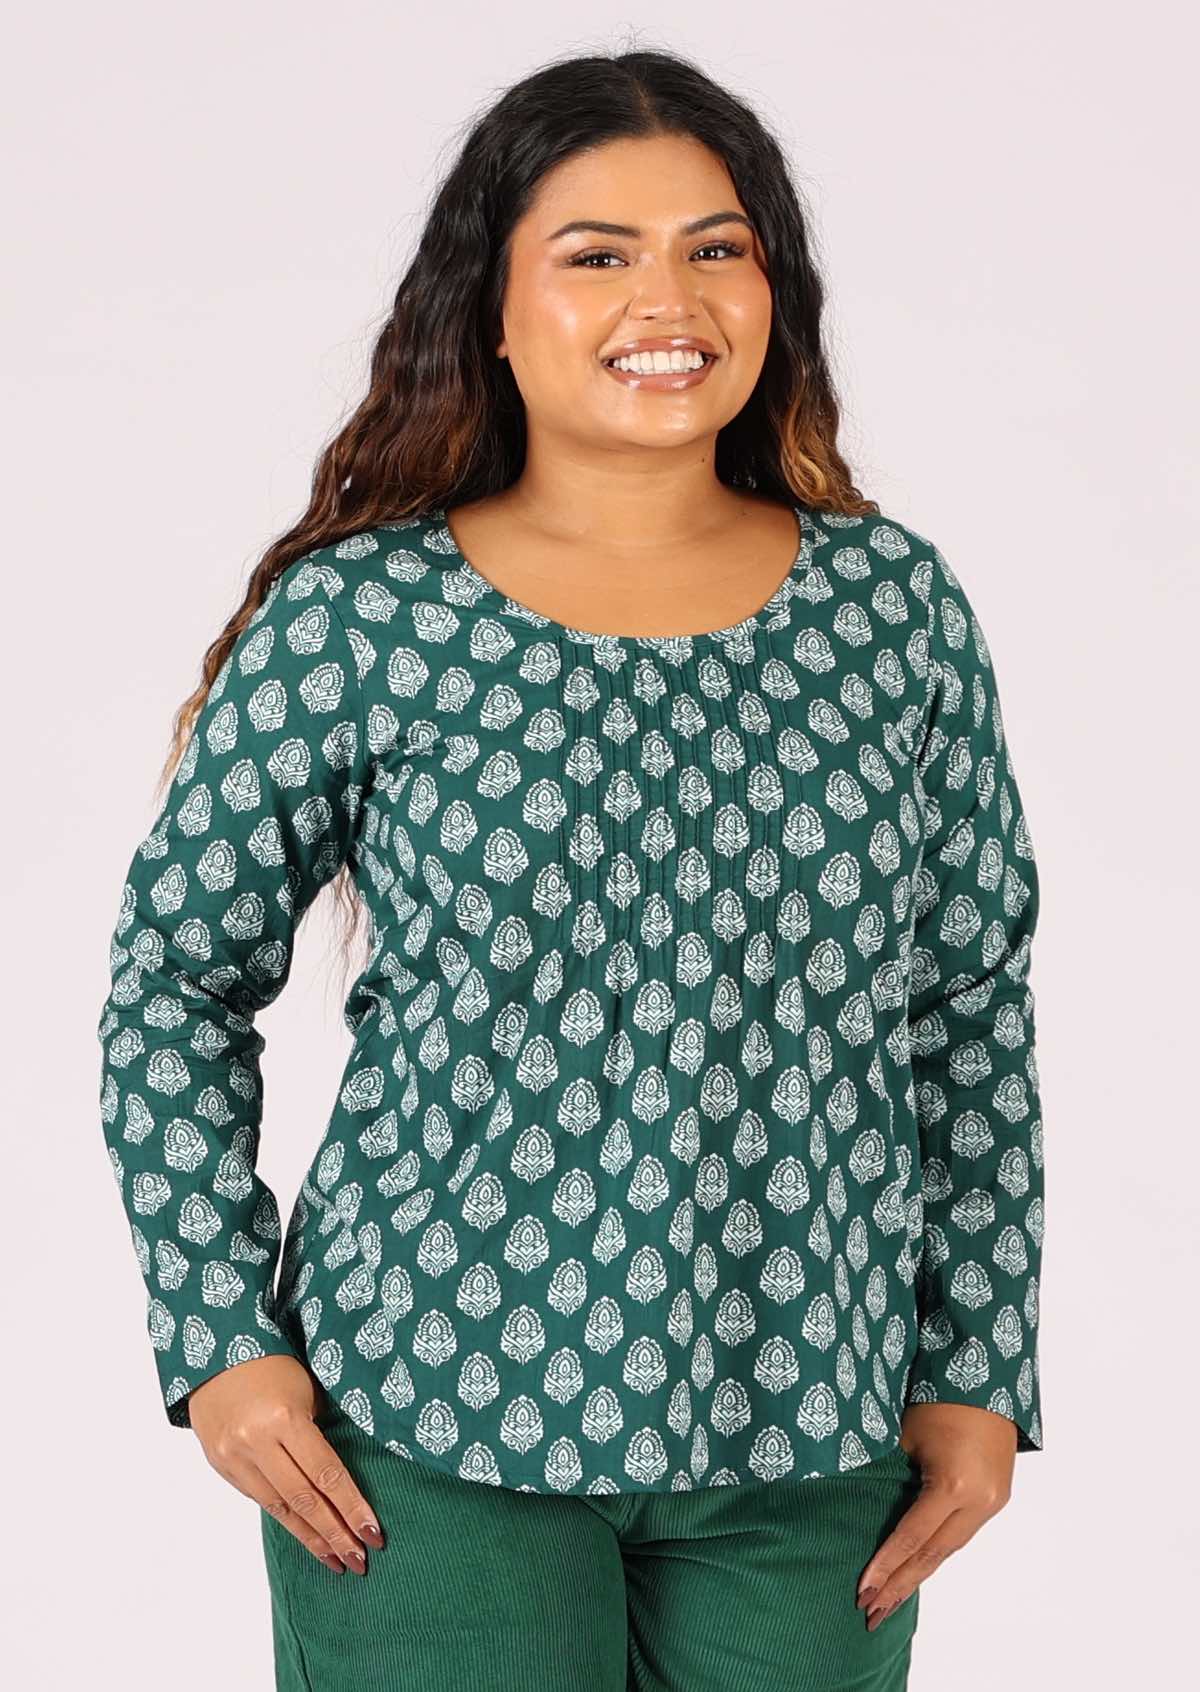 Lightweight cotton top looks great loose or tucked in for work or play